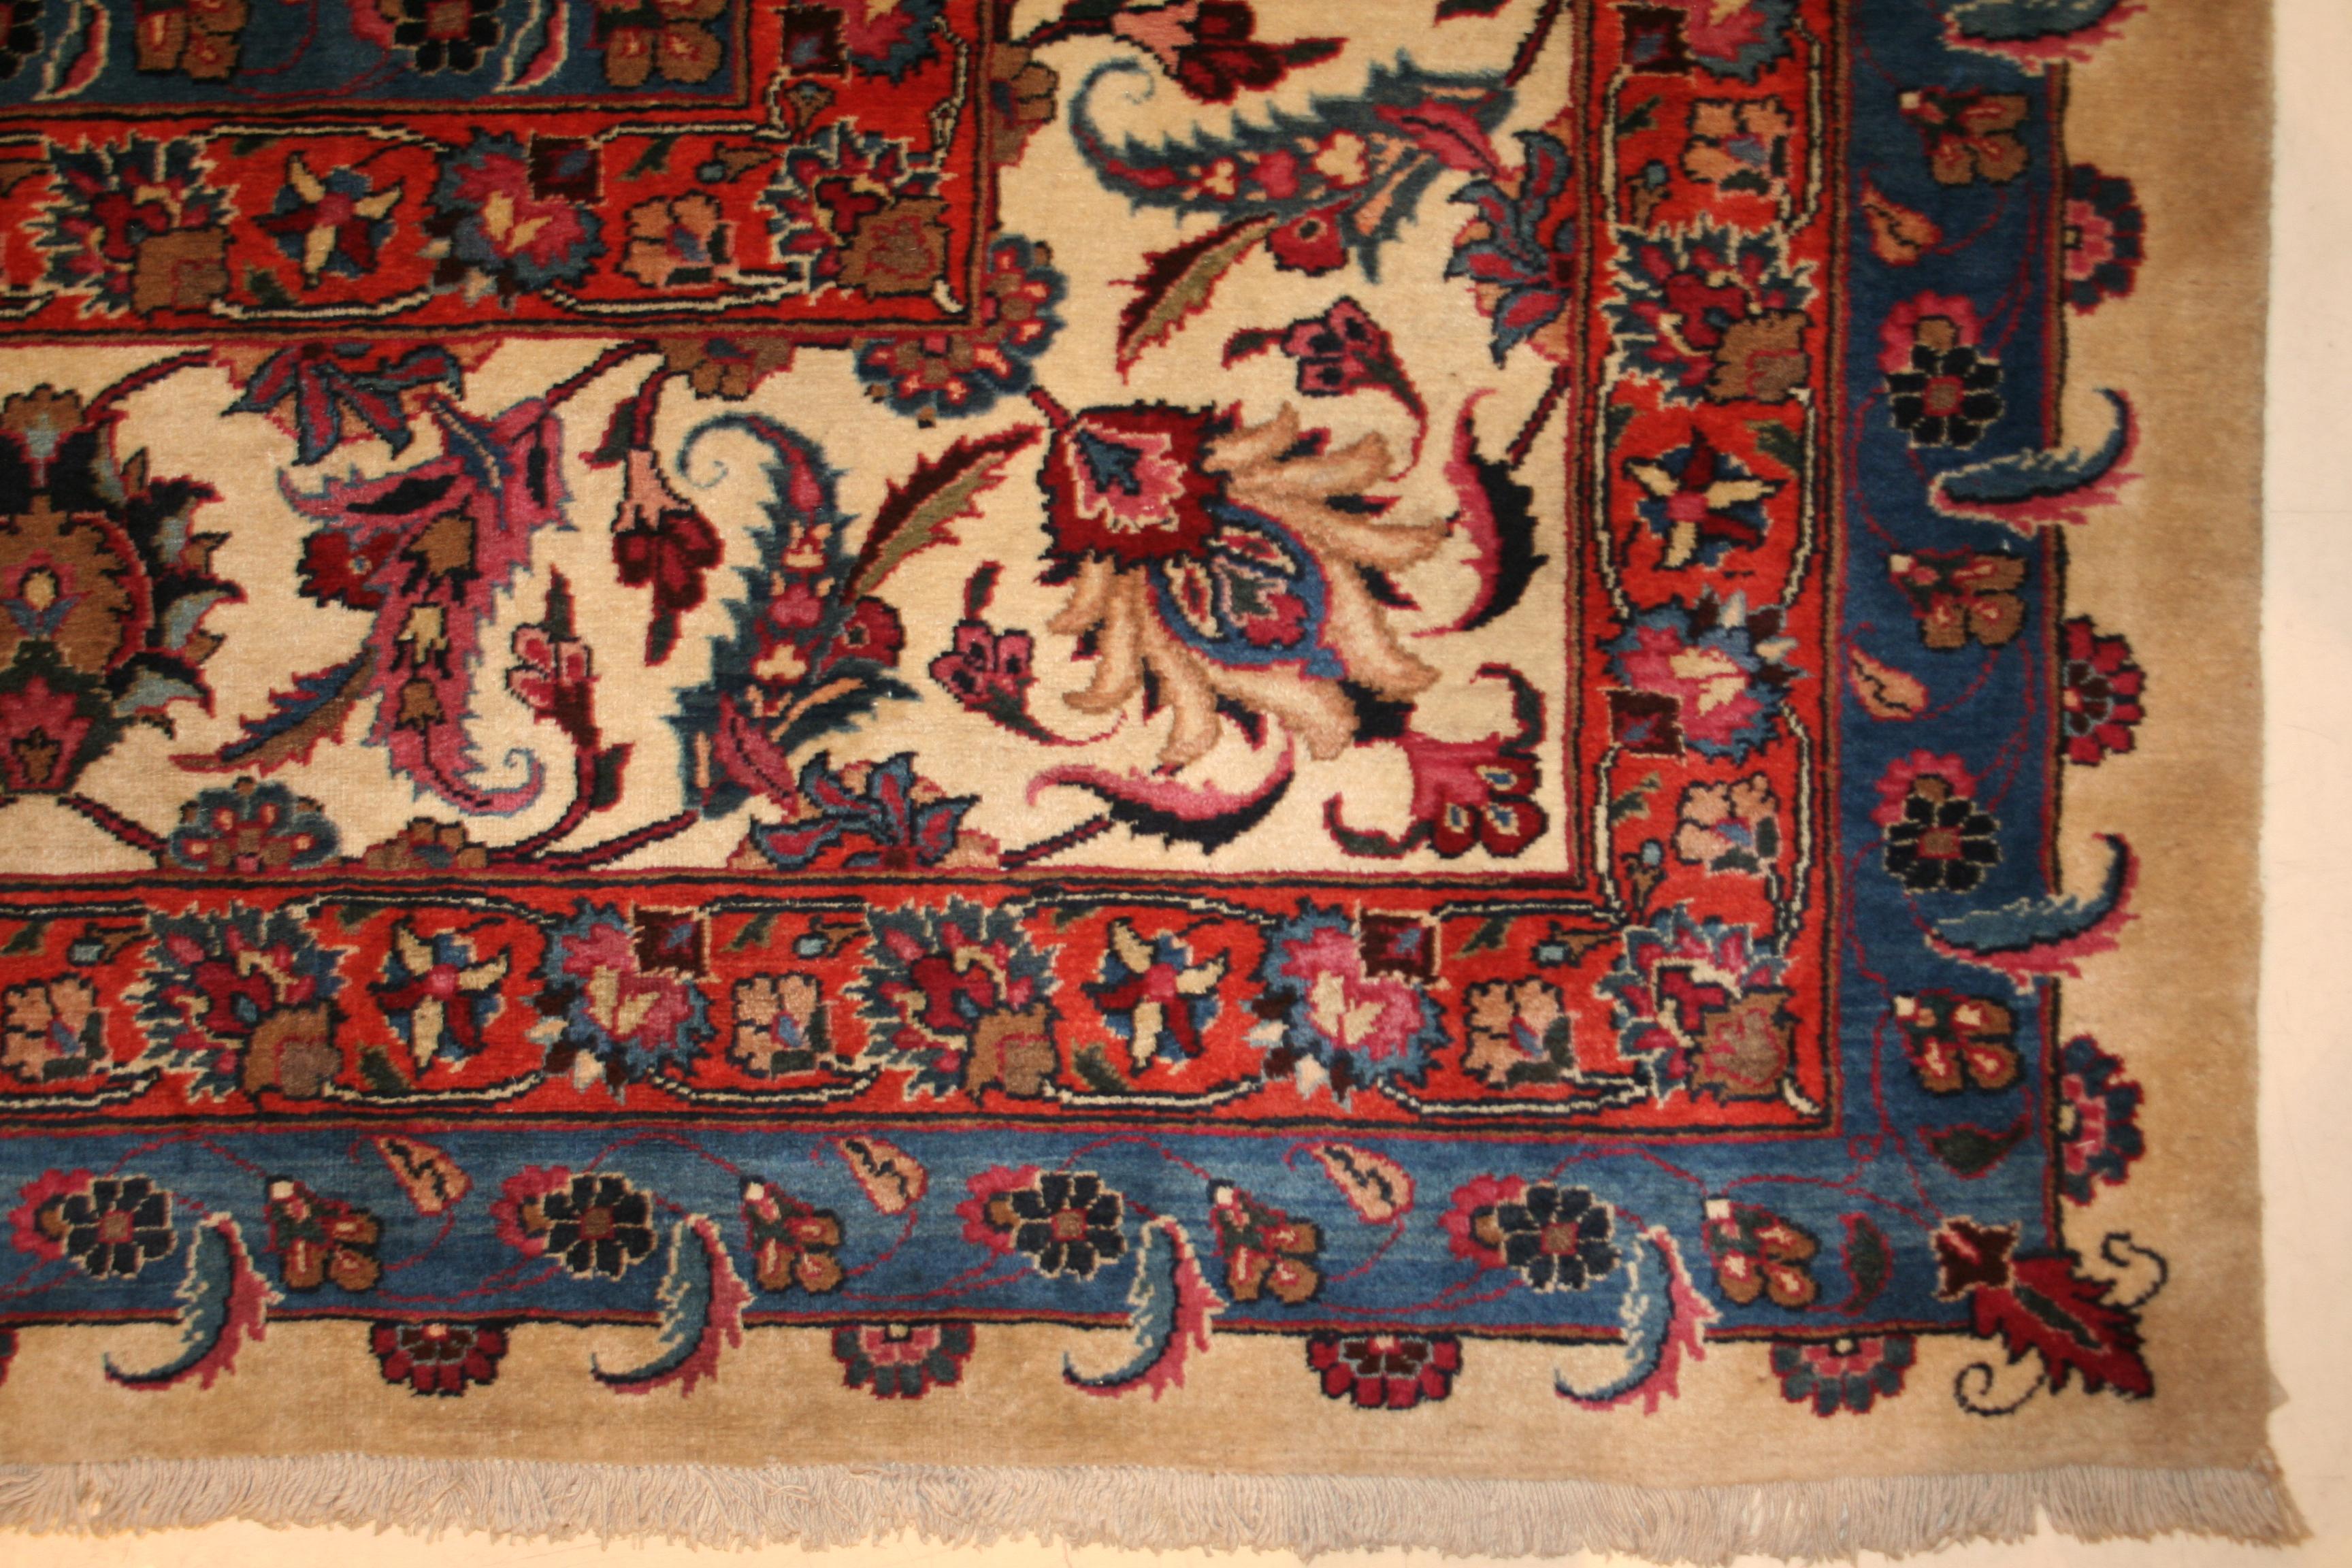 An extremely fine Lahore workshop carpet, characterised by a well spaced all-over botanical pattern of leafs and palmettes on a Burmese Ruby red background. The white border confers a lovely contrast to the composition, defining the frame with great